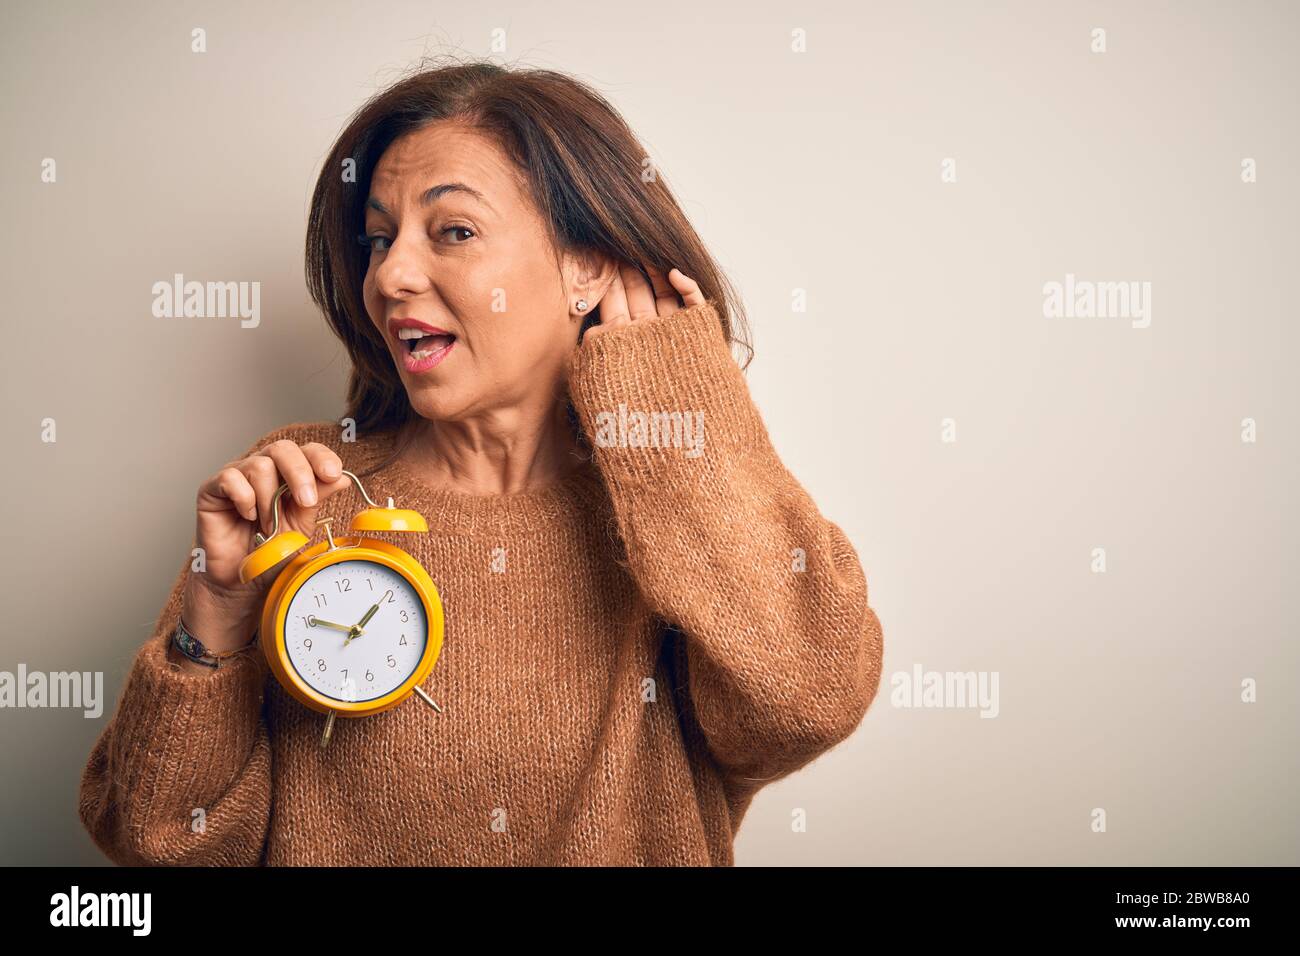 Middle age brunette woman holding clasic alarm clock over isolated background smiling with hand over ear listening an hearing to rumor or gossip. Deaf Stock Photo